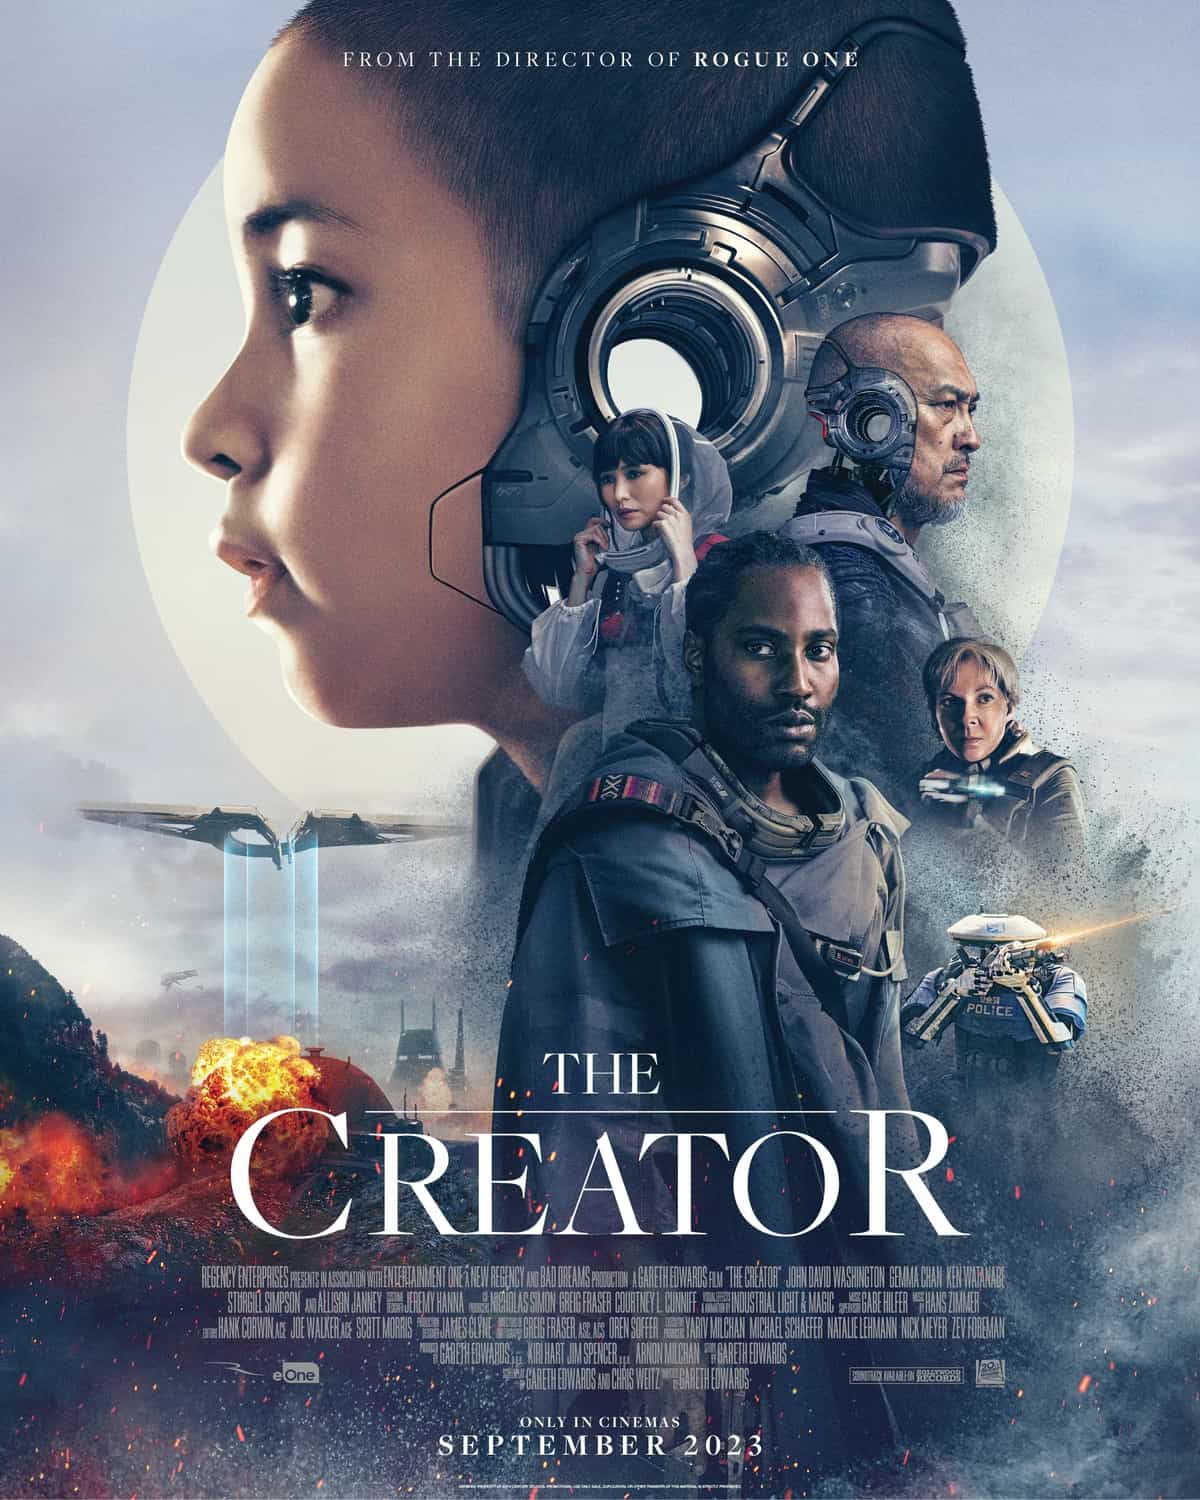 The Creator has been given a 12A age rating in the UK for moderate violence, threat, injury detail, infrequent strong language